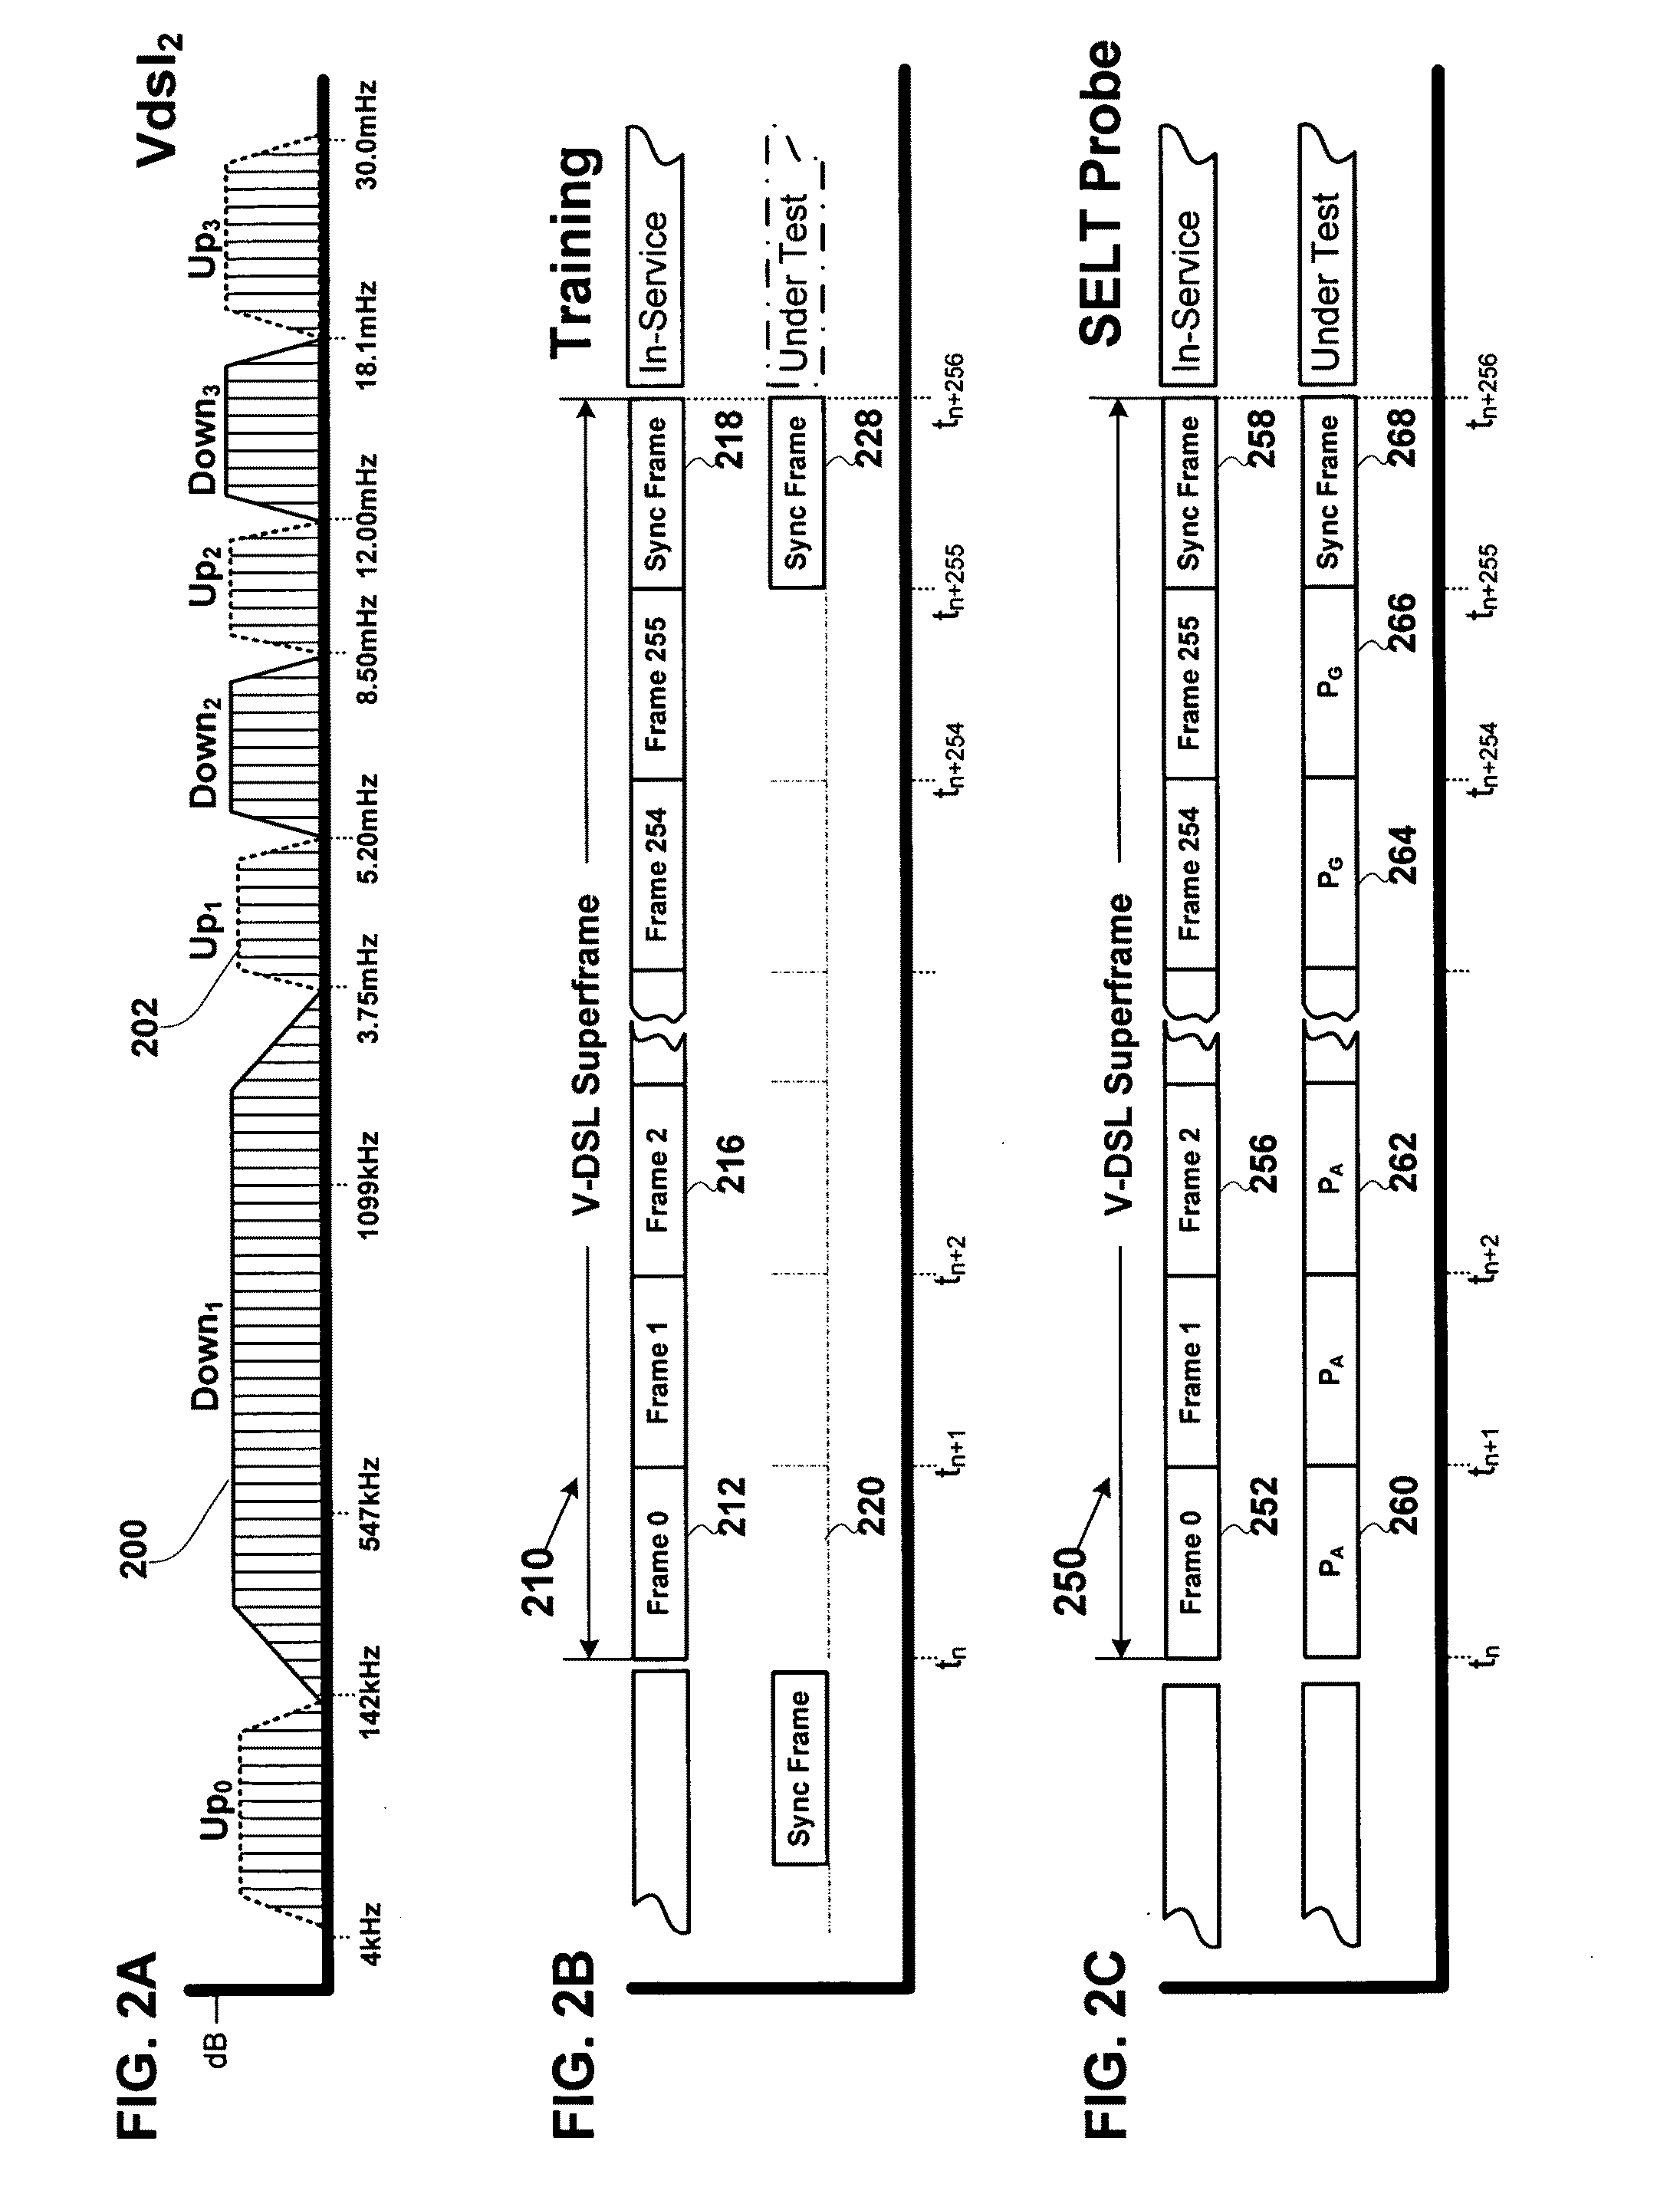 Method and apparatus for crosstalk cancellation during SELT testing